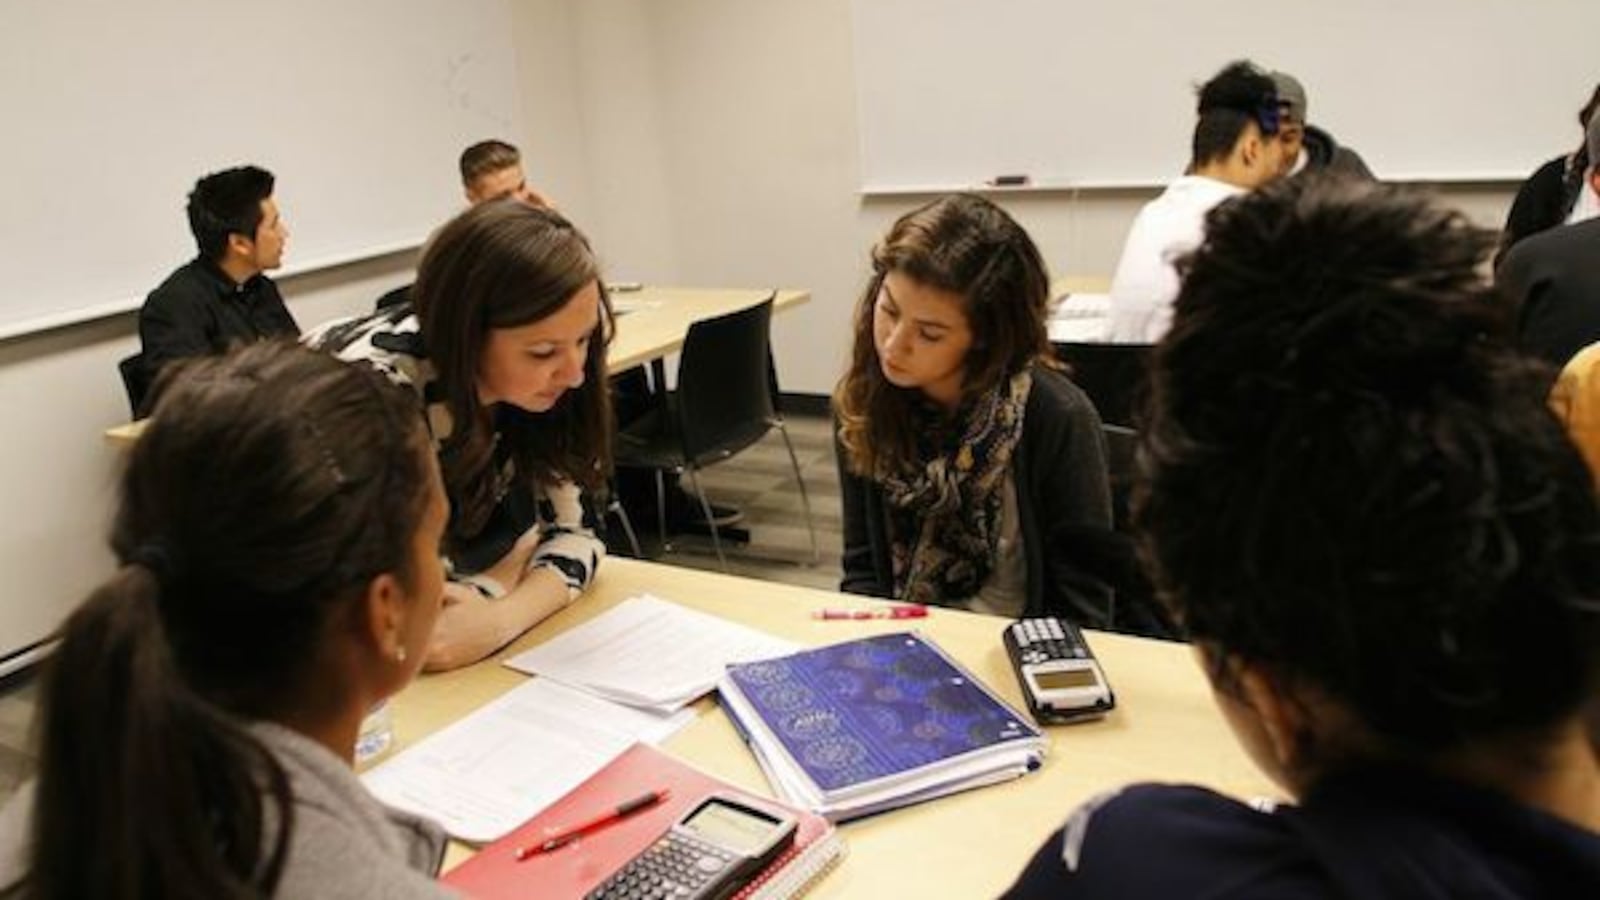 Students discuss a math problem in 2014 as part of a Metro State program meant to bring students up to speed without remediation. (Photo by Tim Carroll )